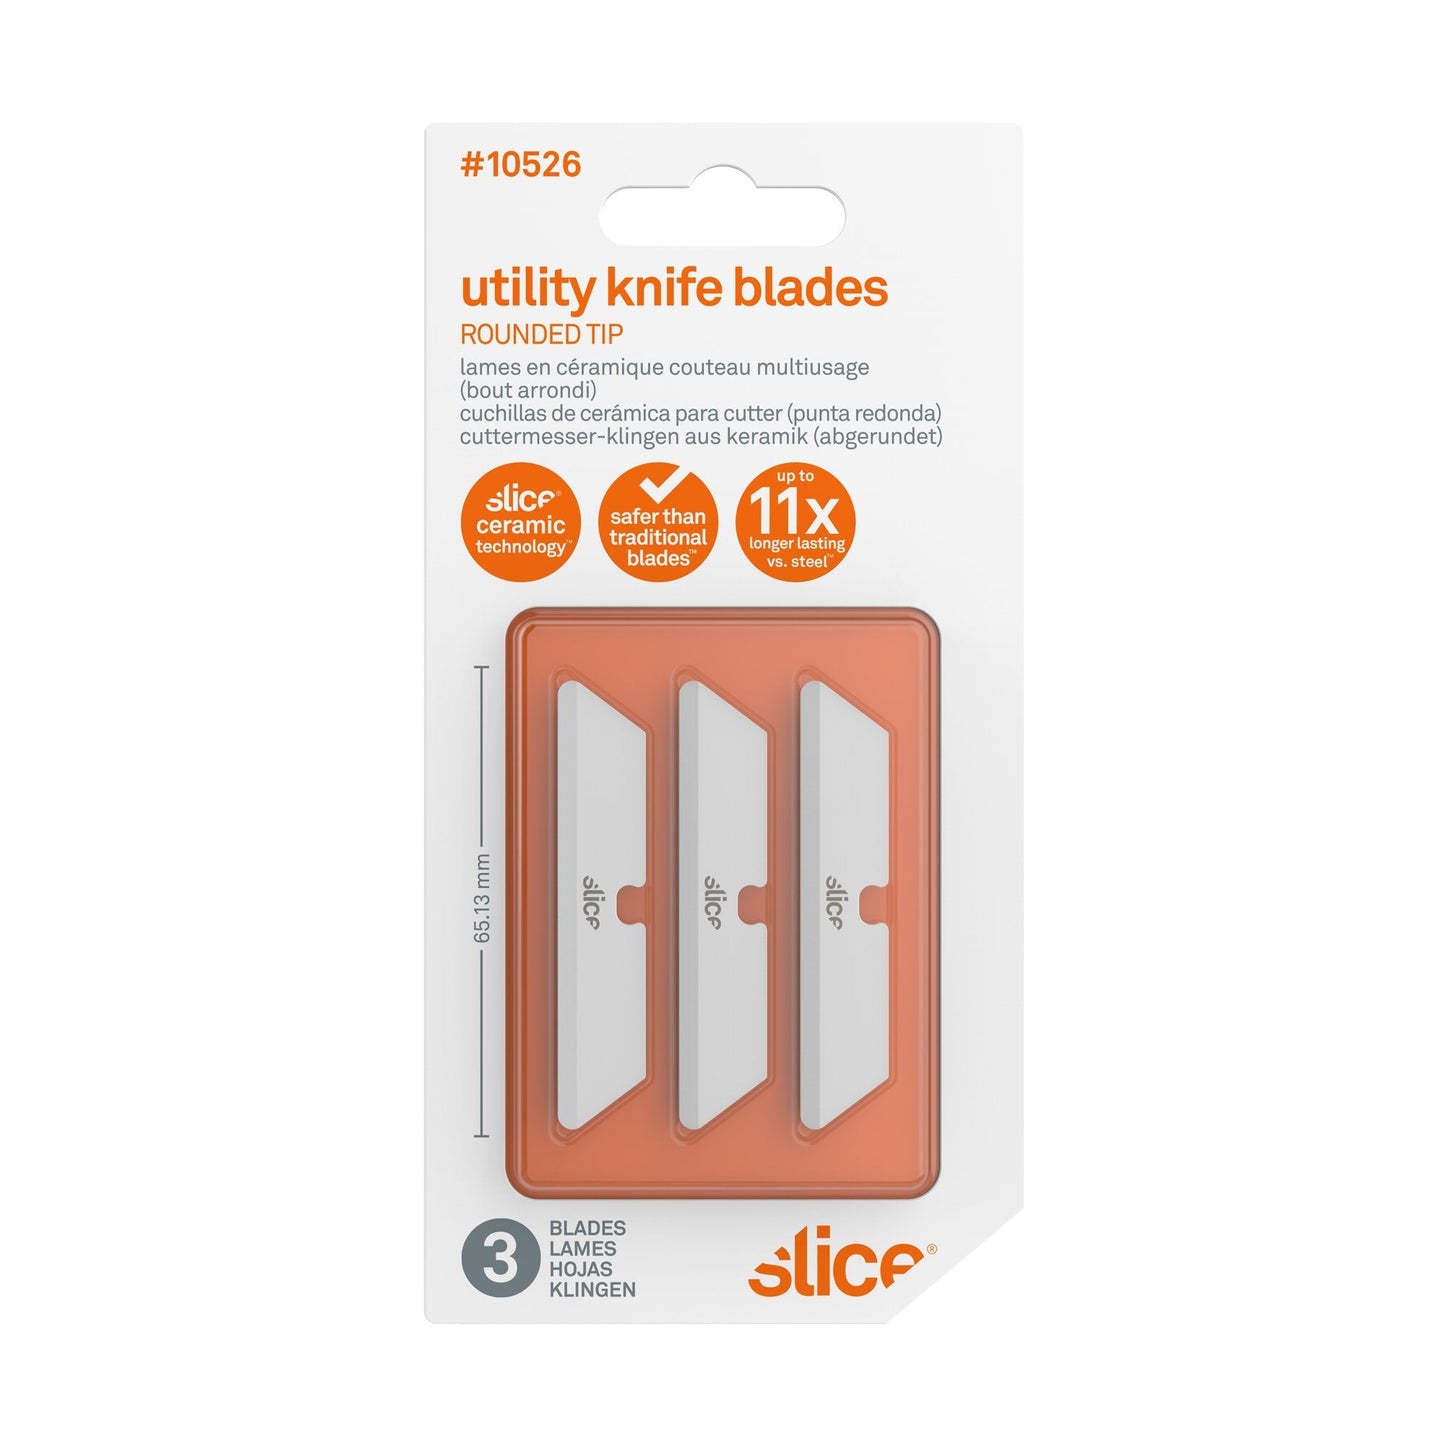 Utility Knife Blades (Rounded Tip)